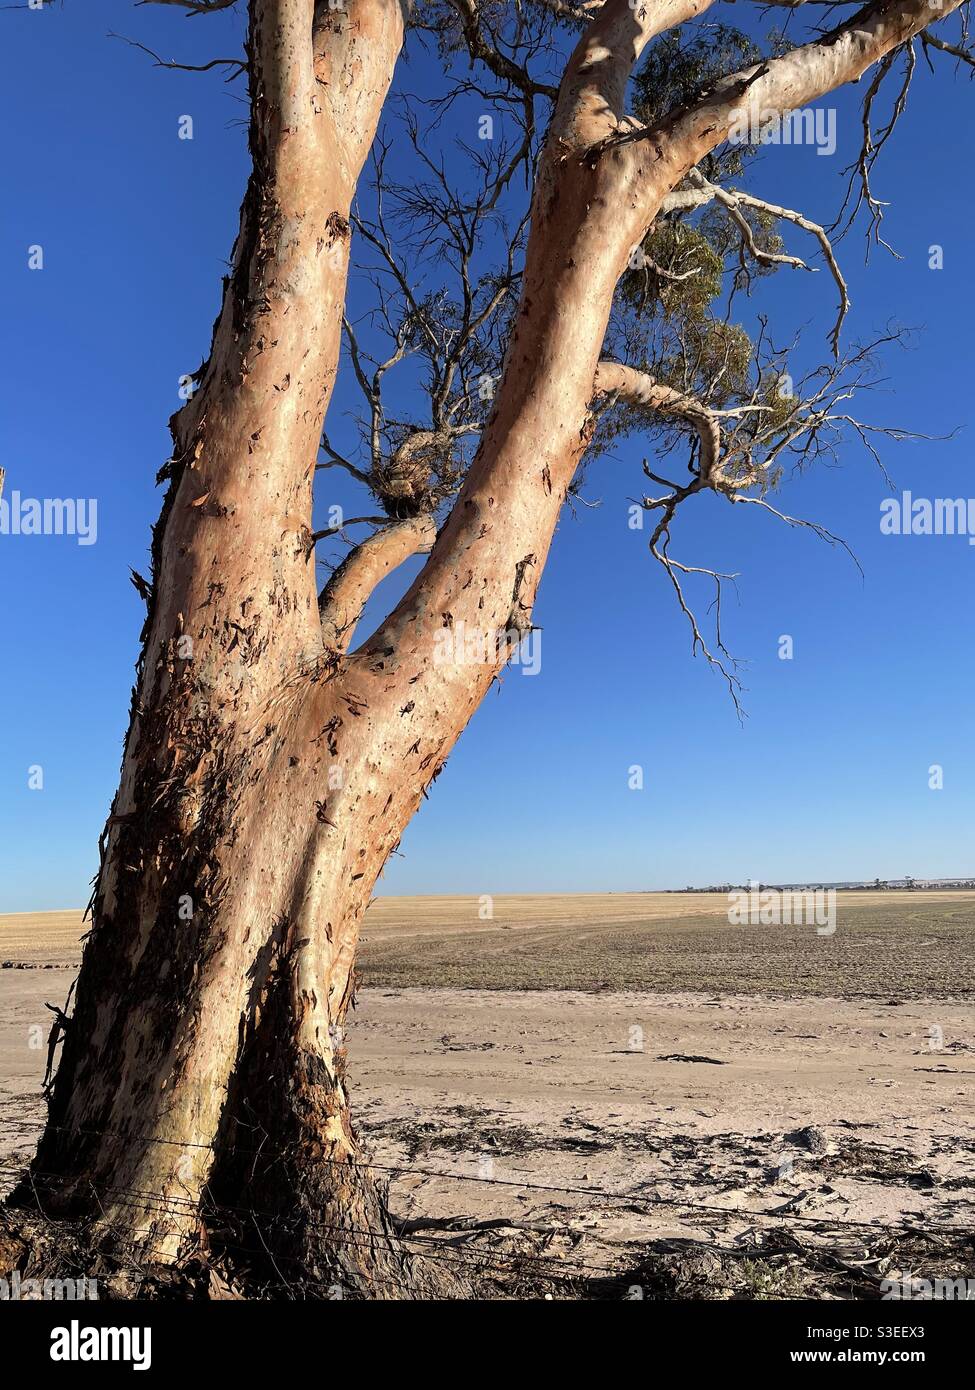 Outback trees in paddock Stock Photo